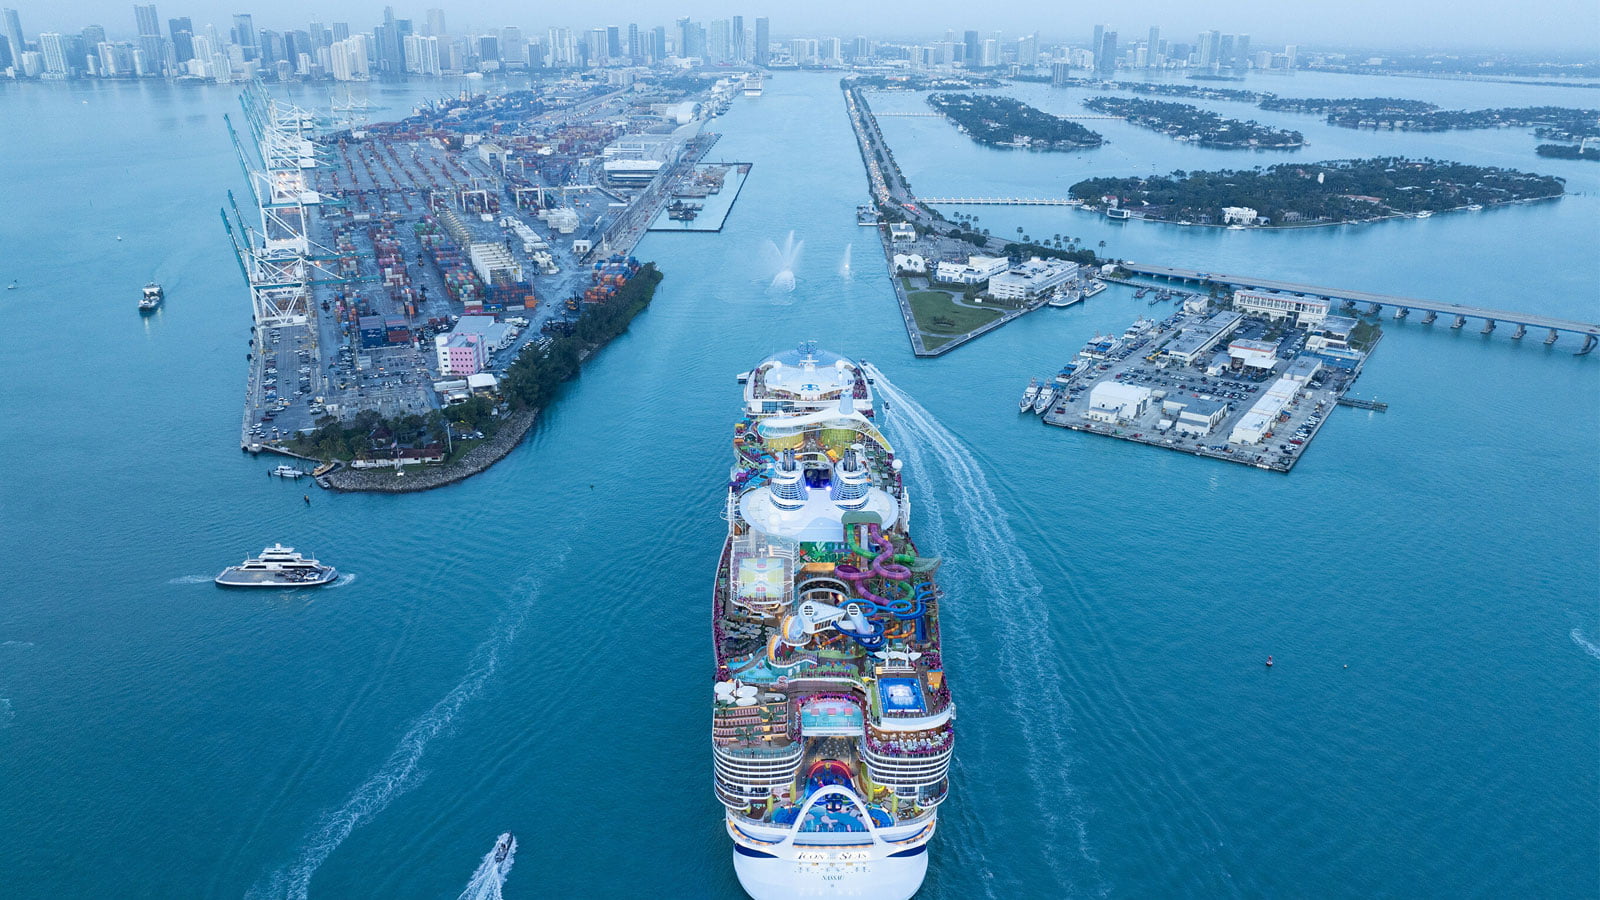 Welcome to Miami: Royal Caribbean’s highly anticipated Icon of the Seas arrives for the first time